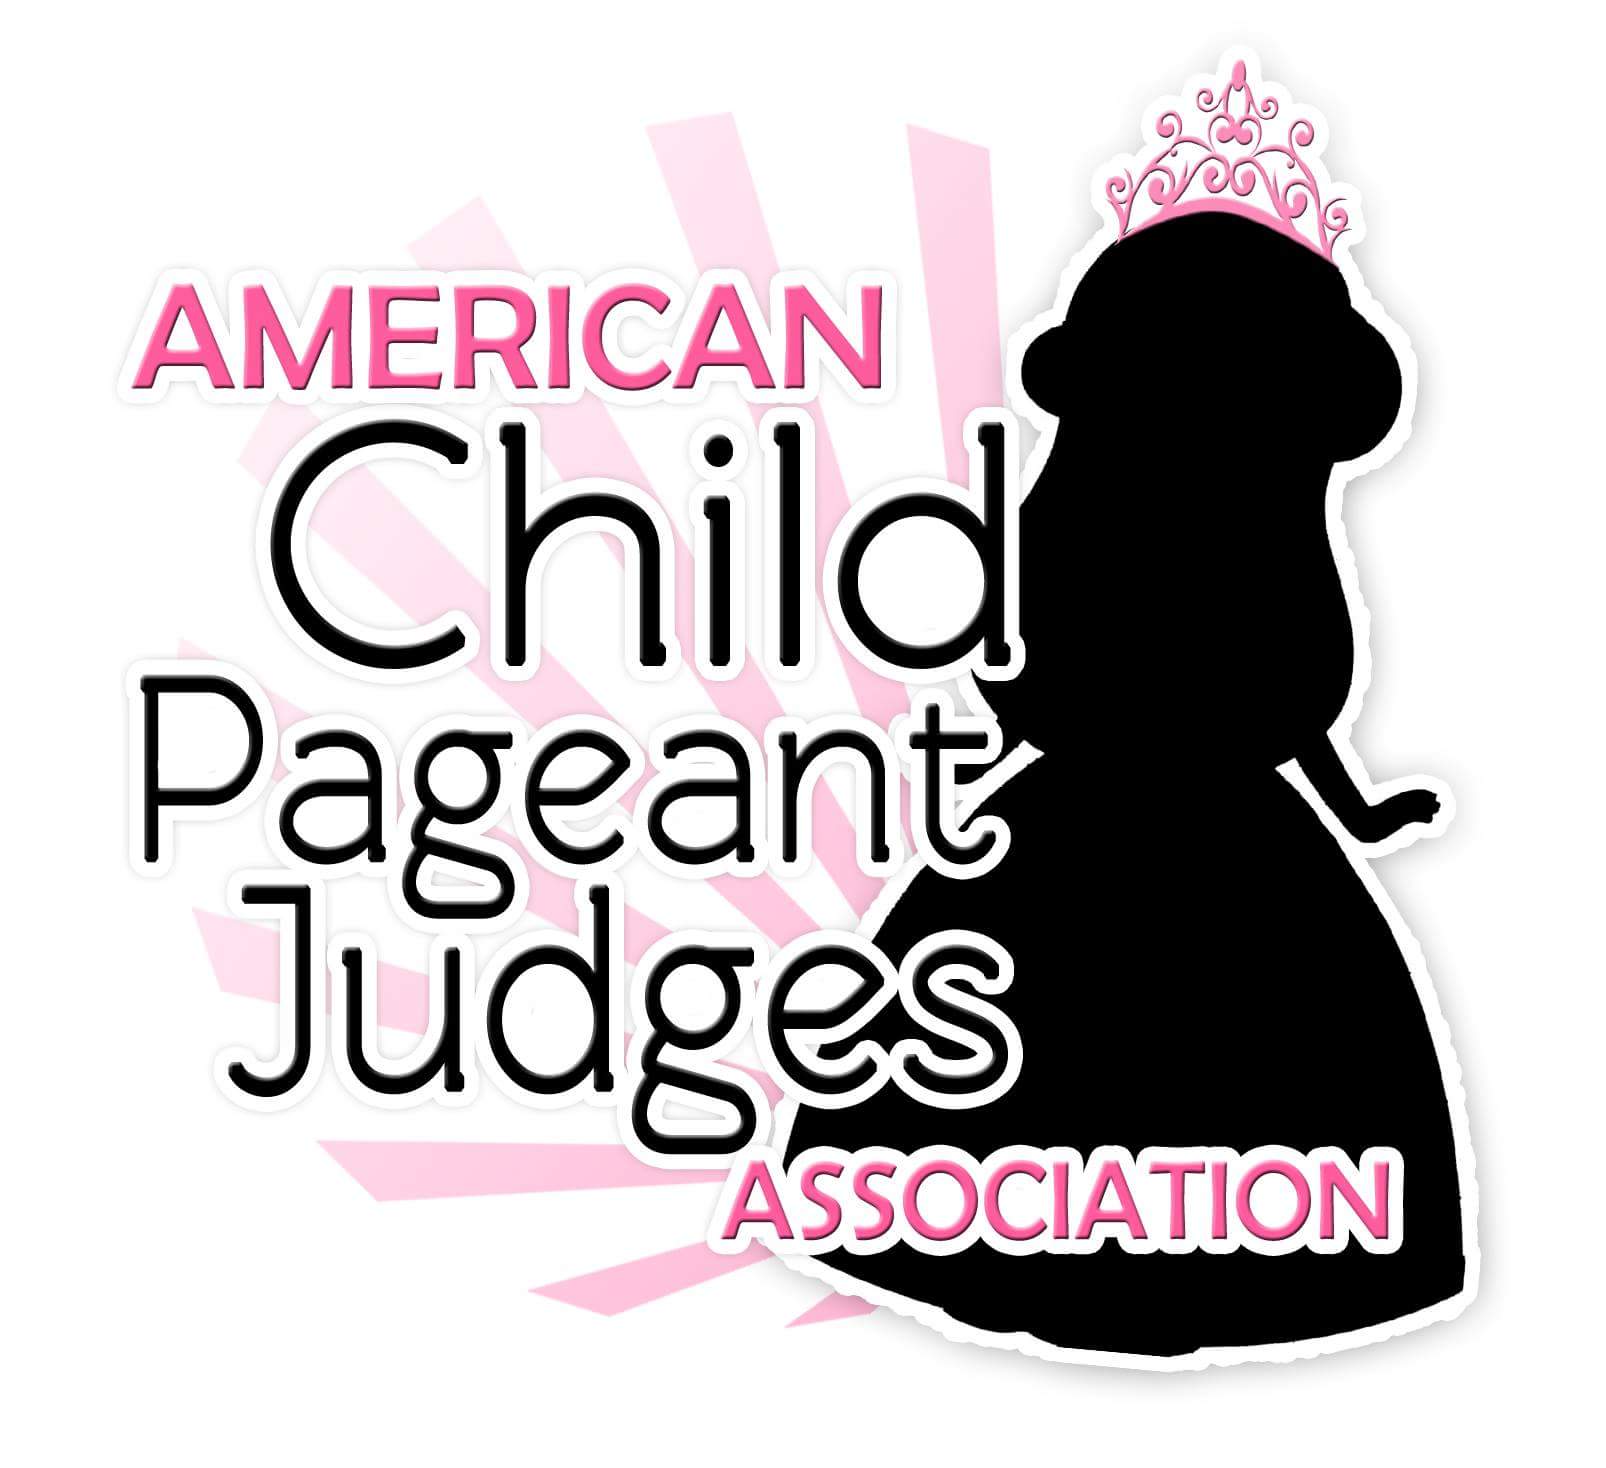 Become a pageant judge soon via the ACPJA Child Pageant Judge training course.